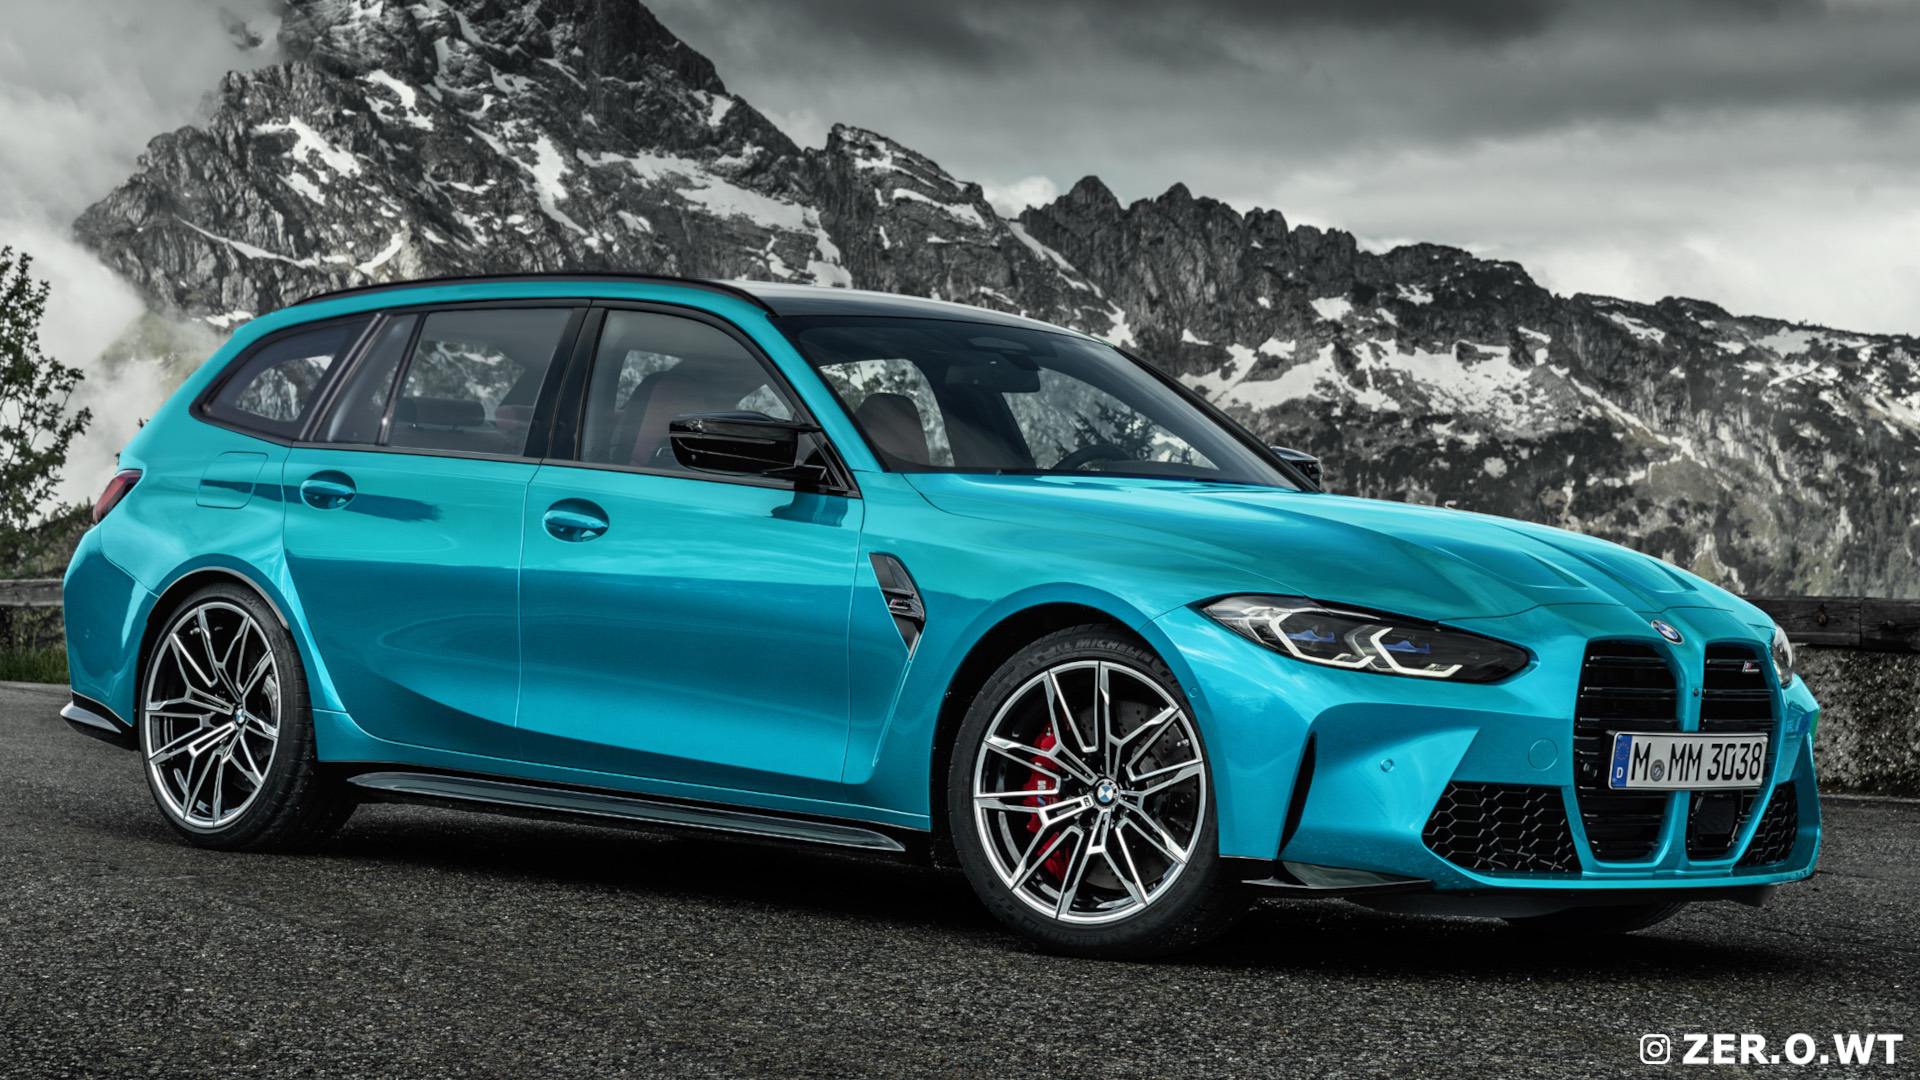 The future BMW M3 Touring gets new renderings after the M3 unveil